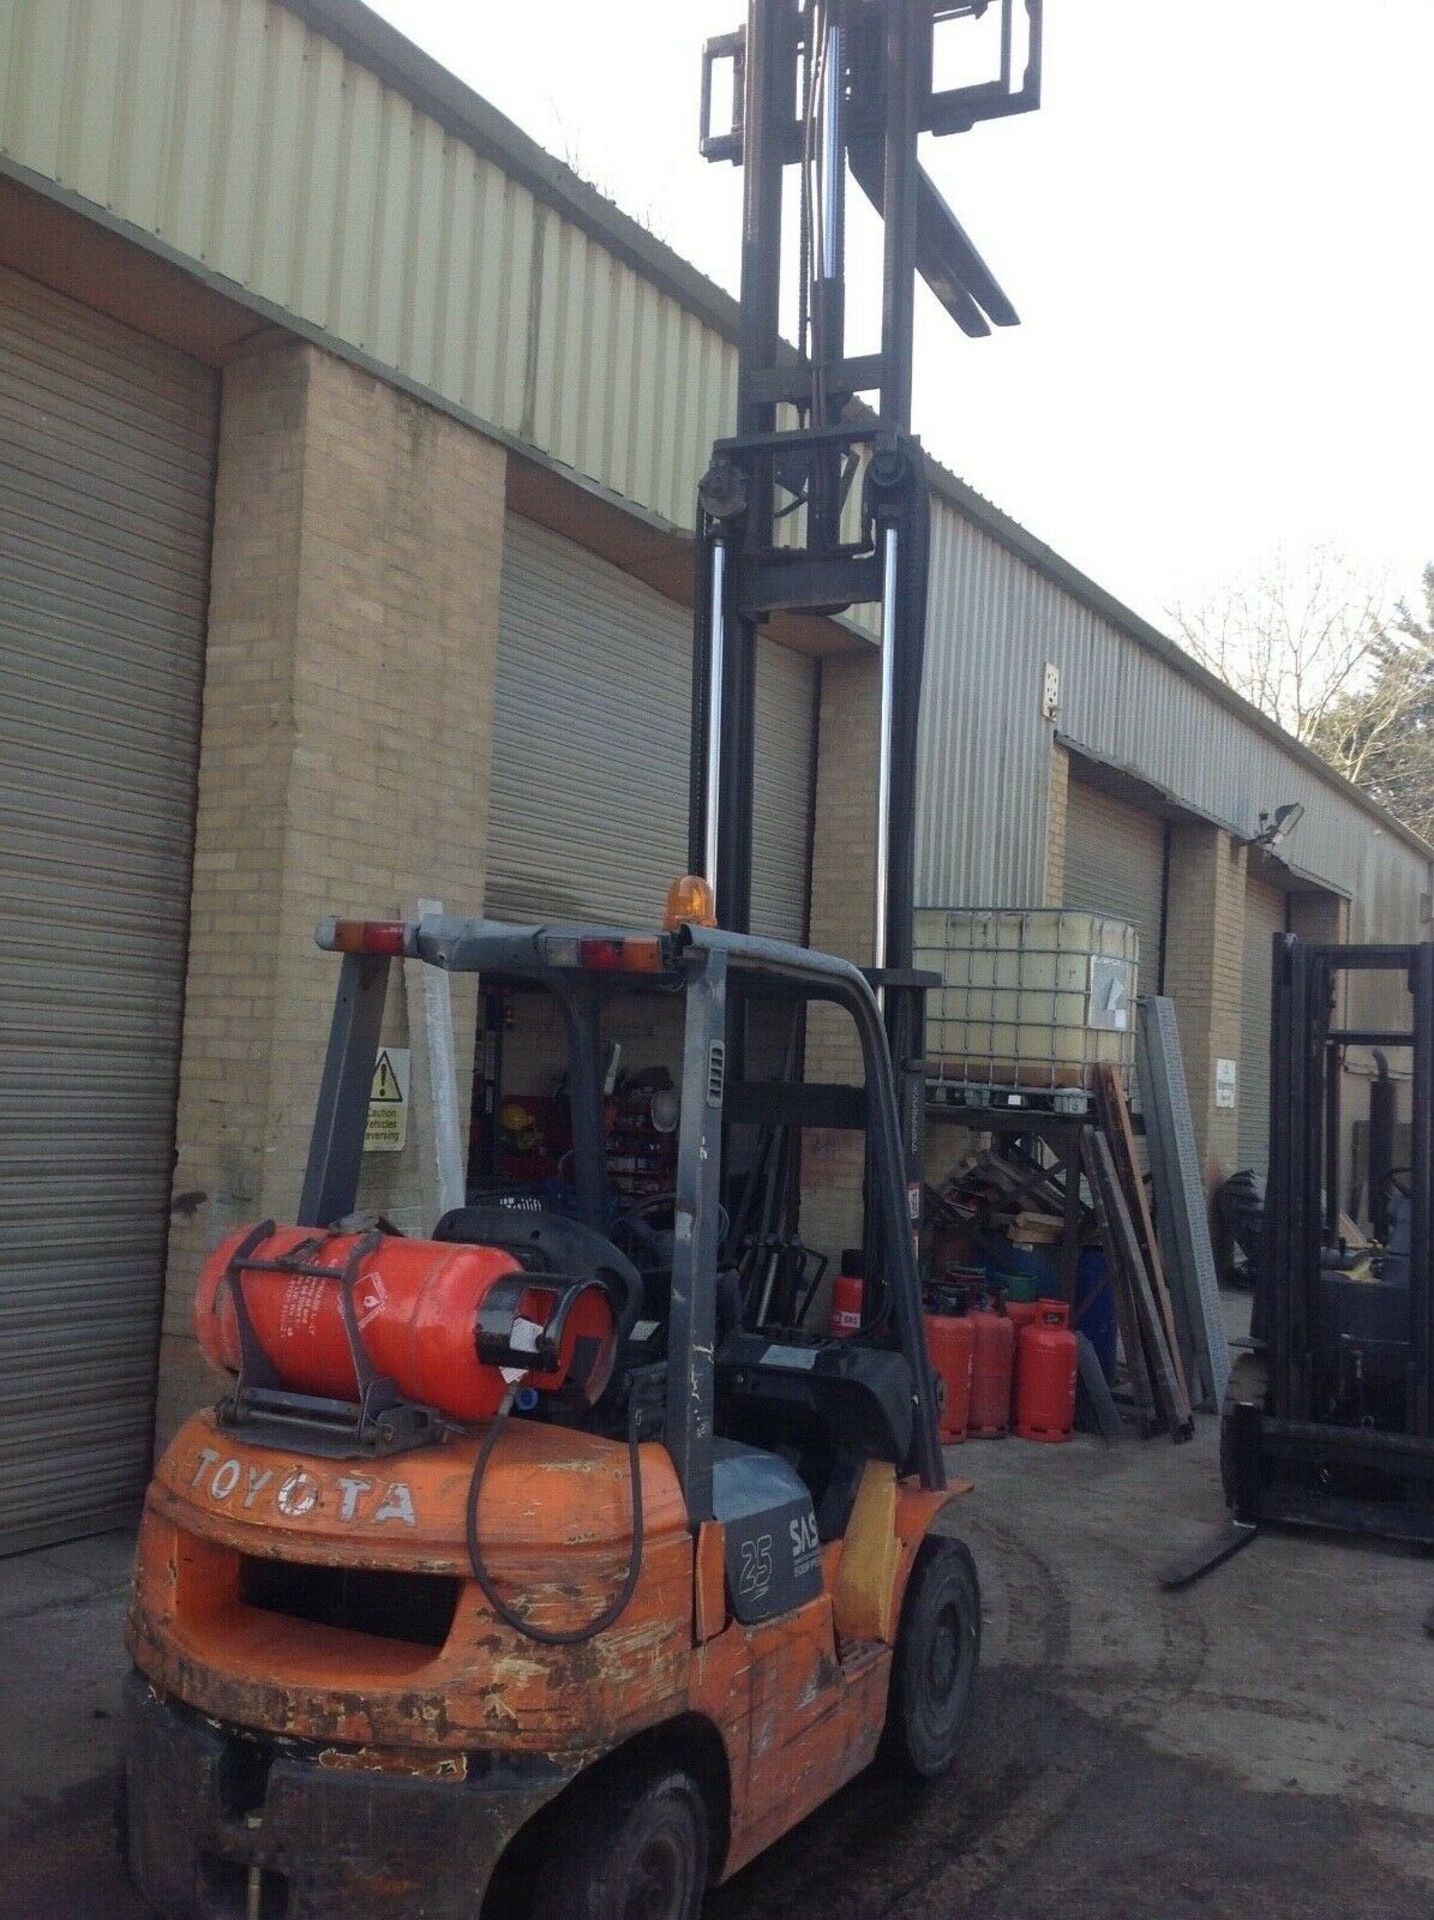 Toyota 2.5 ton gas forklift truck - Image 2 of 5